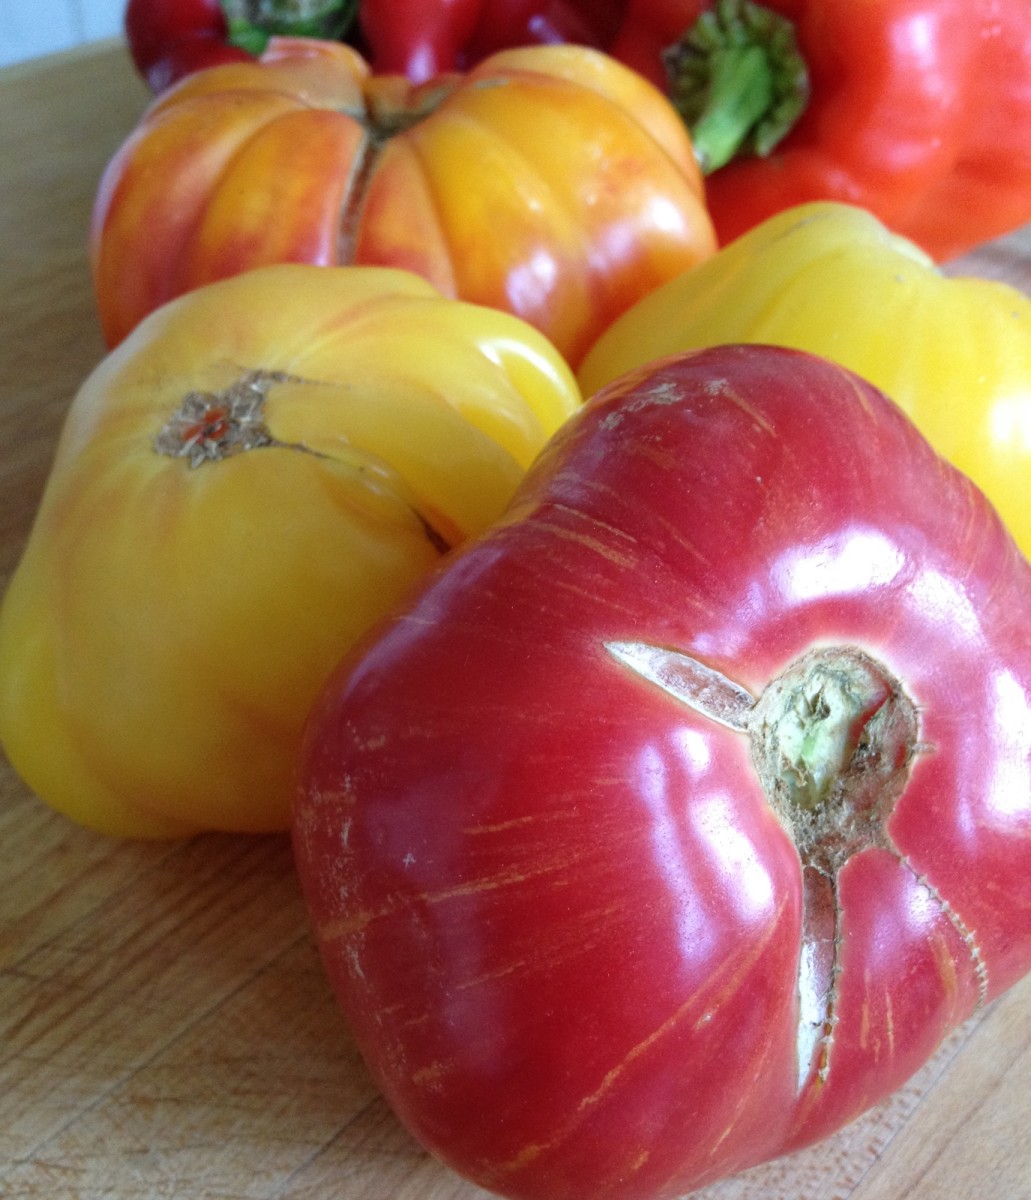 Red, yellow, and orange heirloom tomatoes